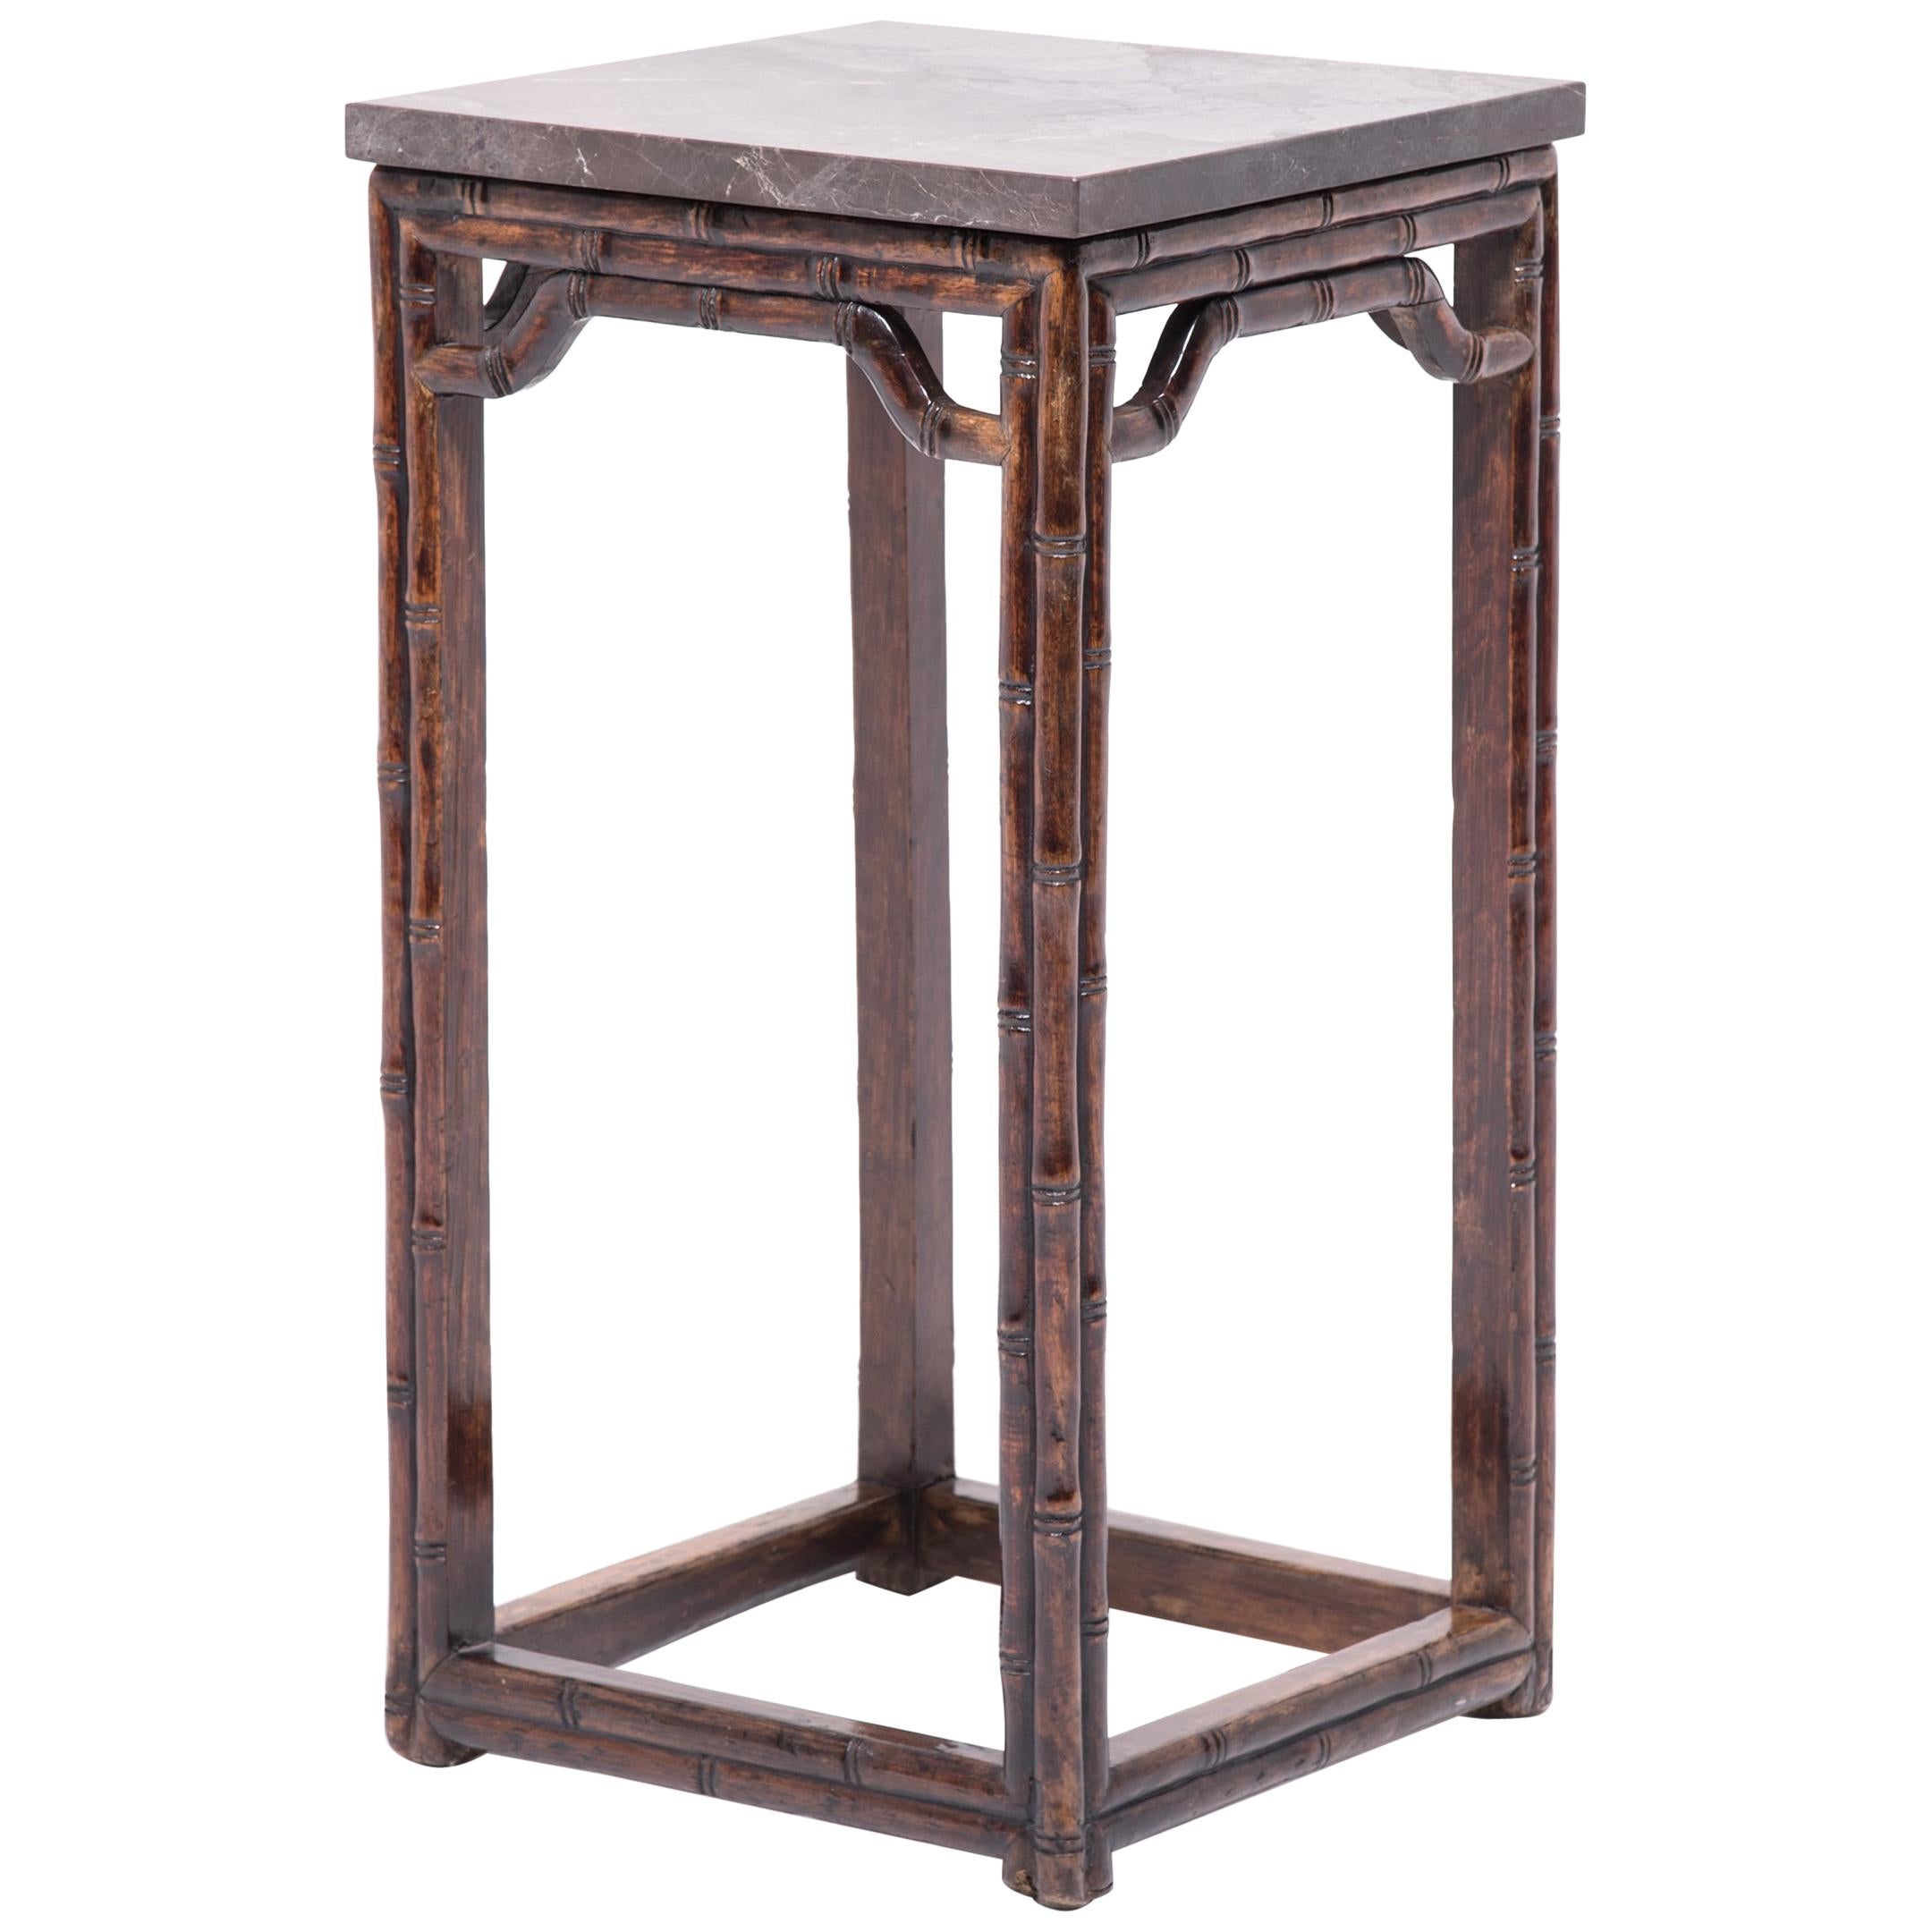 Early 20th Century Chinese Faux Bamboo Display Table